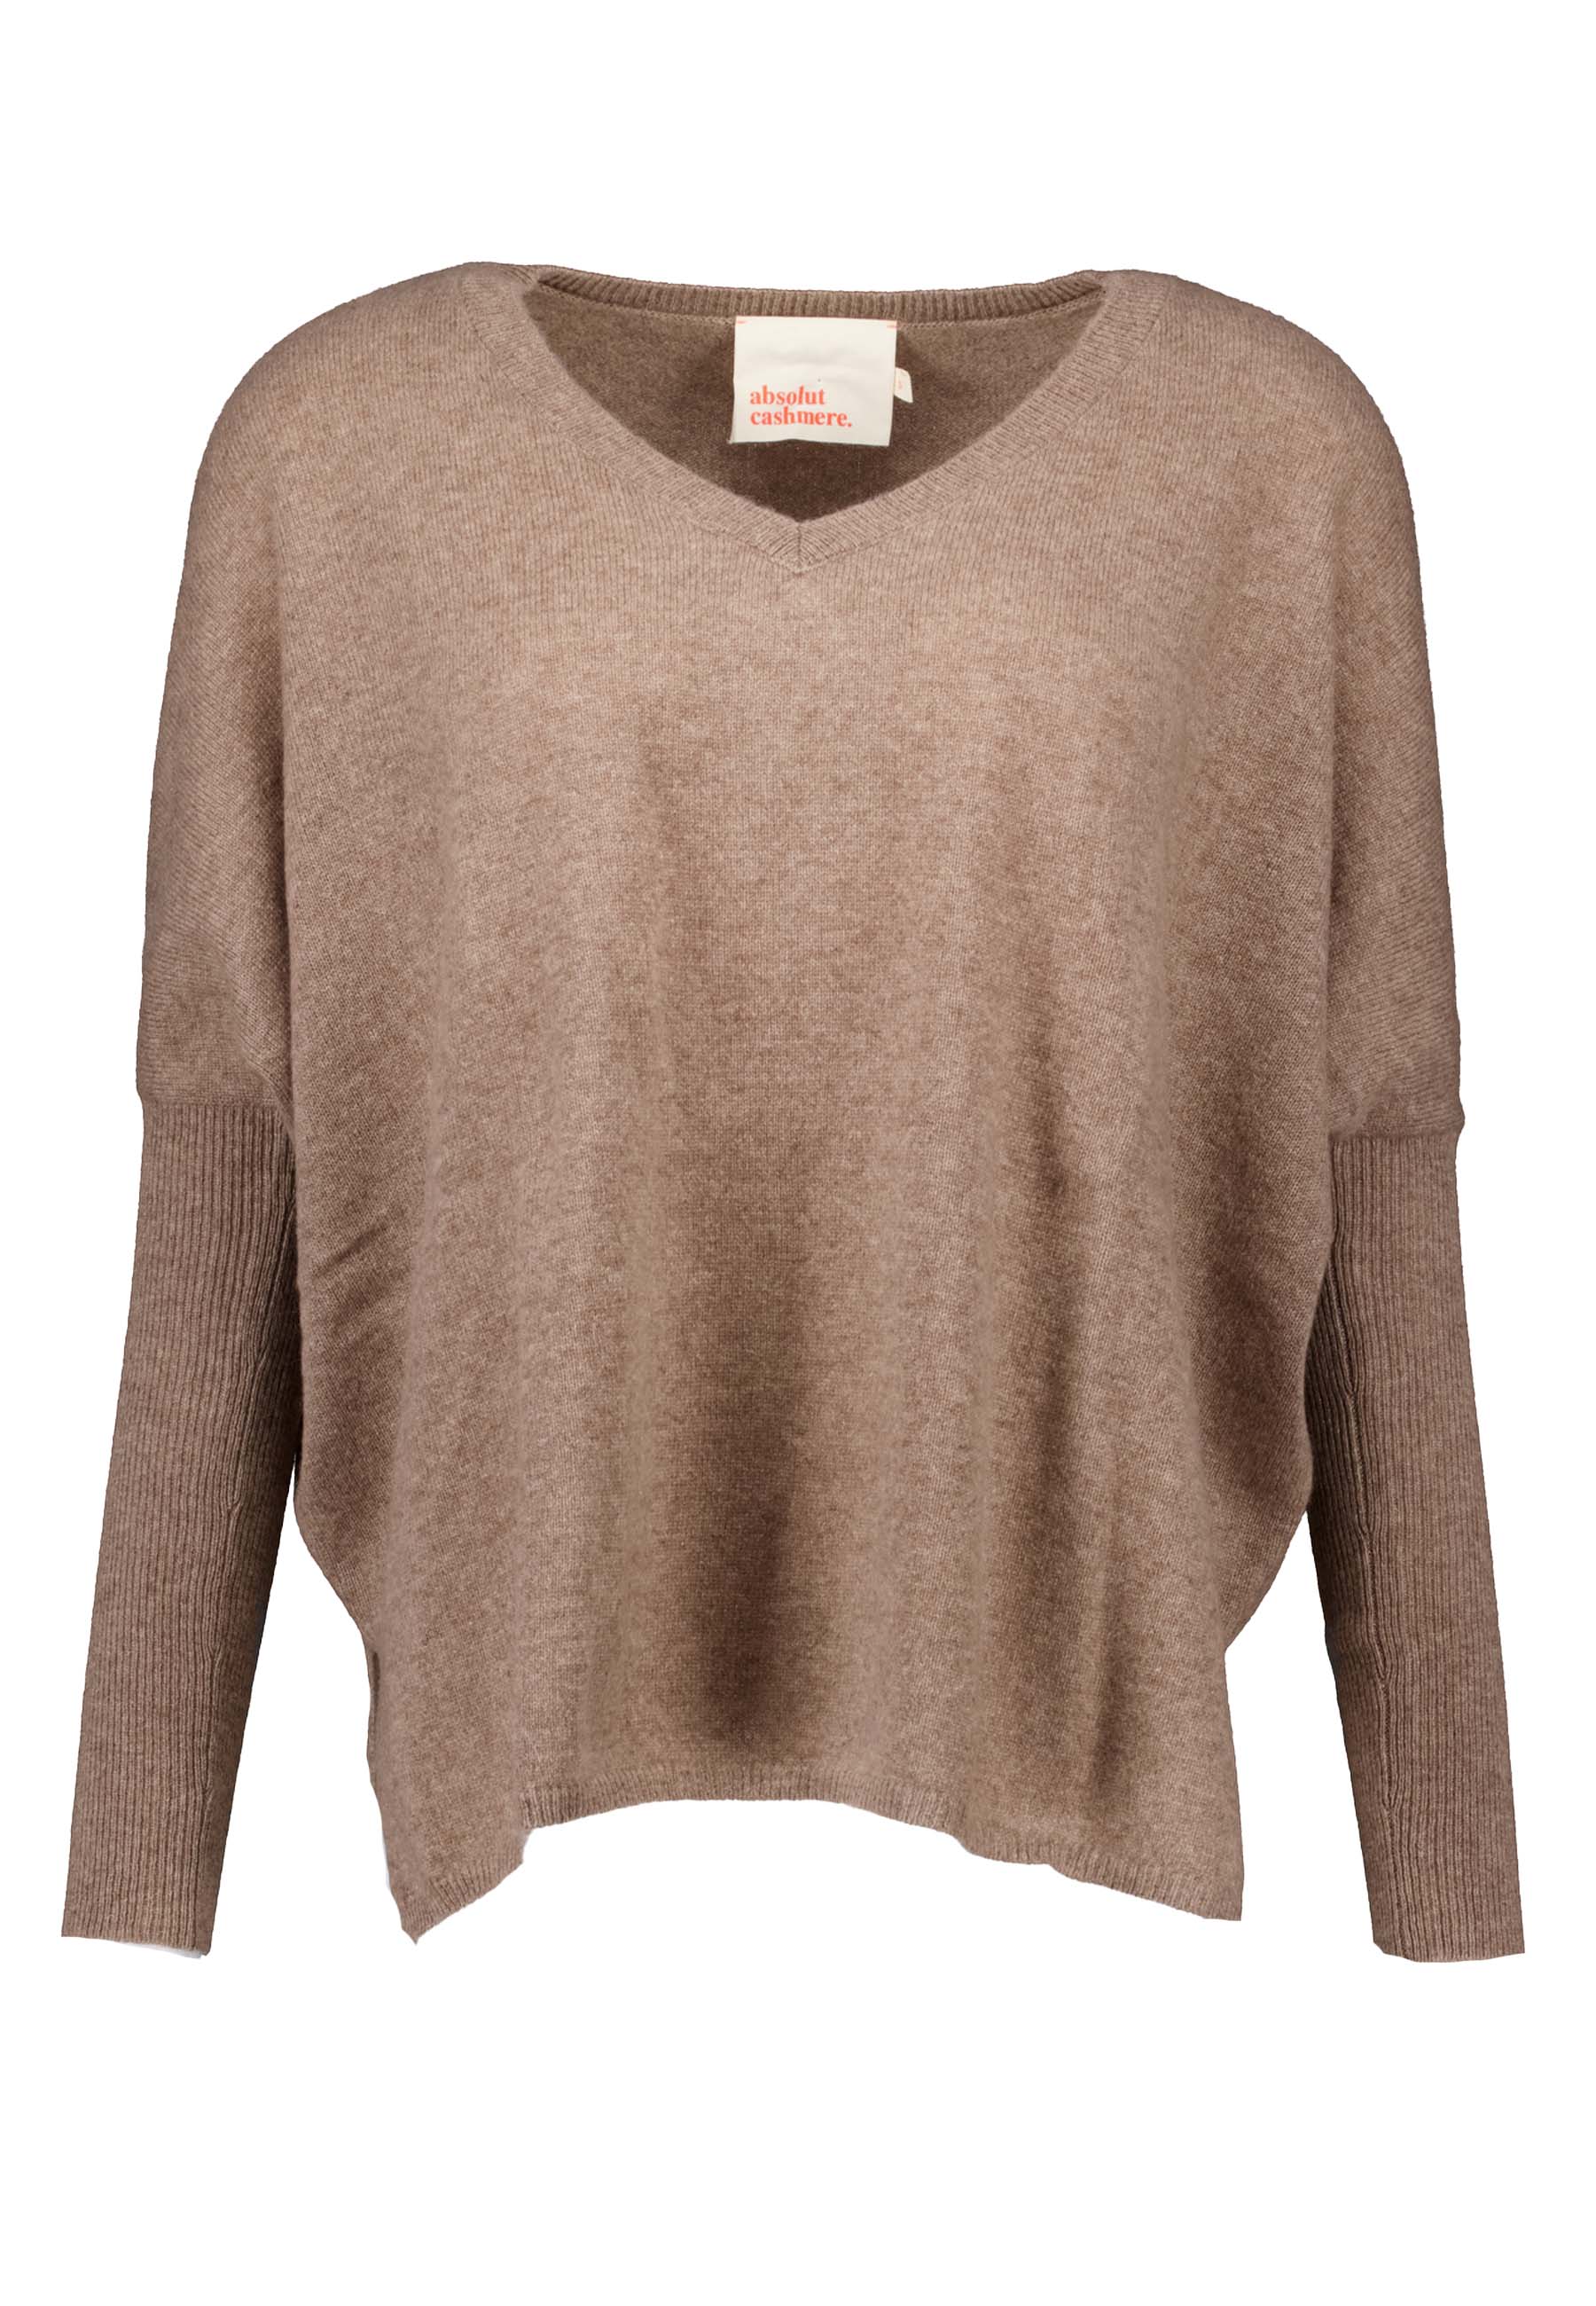 Absolut Cashmere truien taupe Dames maat L